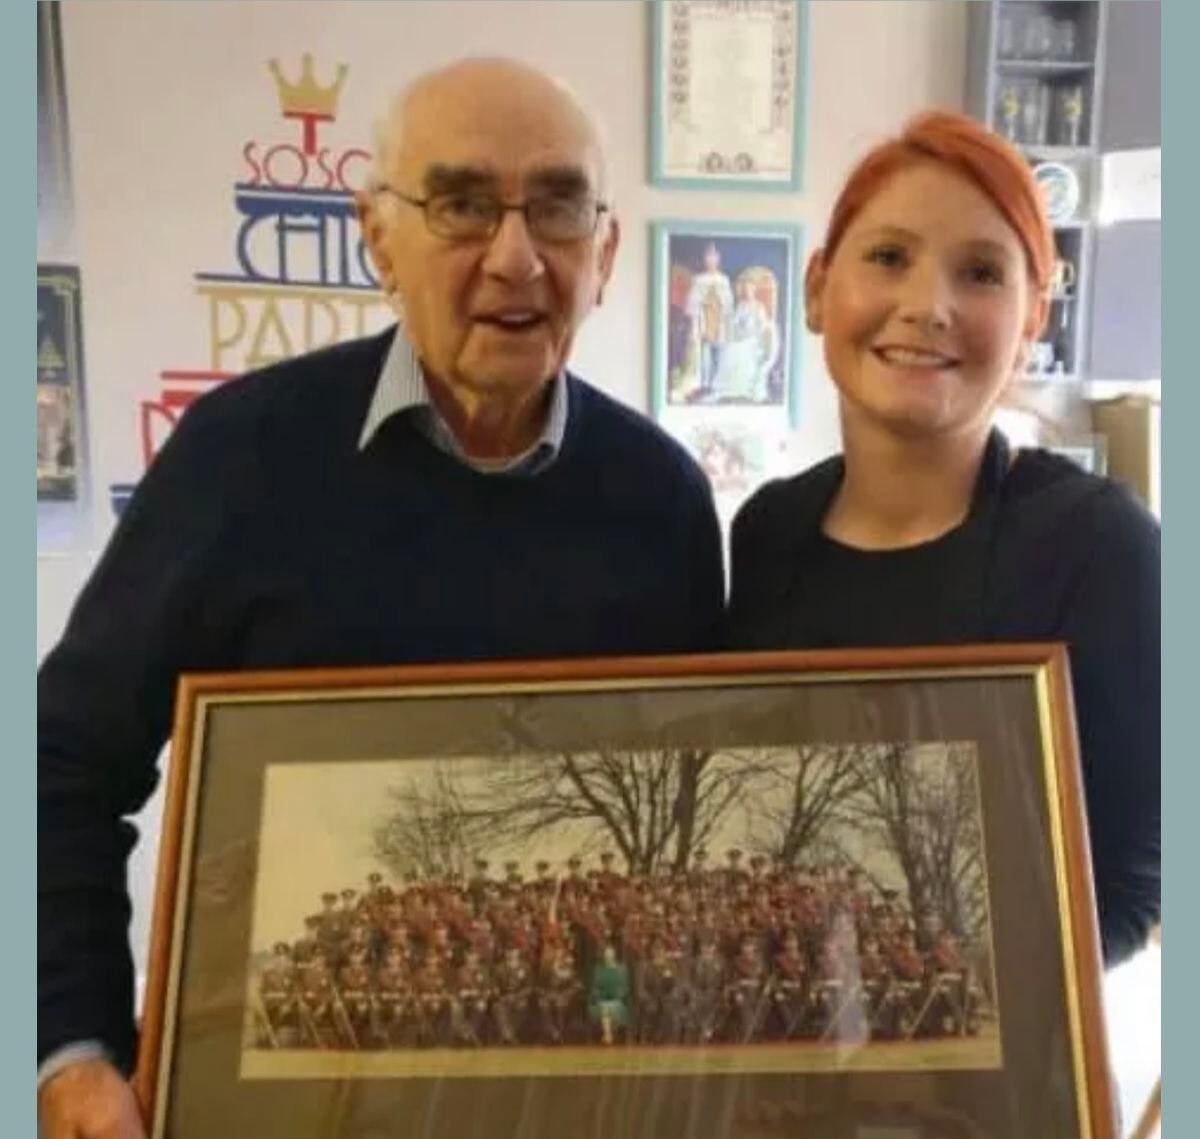 Amy with Derek, who gave the cafe the picture he took of the Lancashire Regiment, of which there are only three.